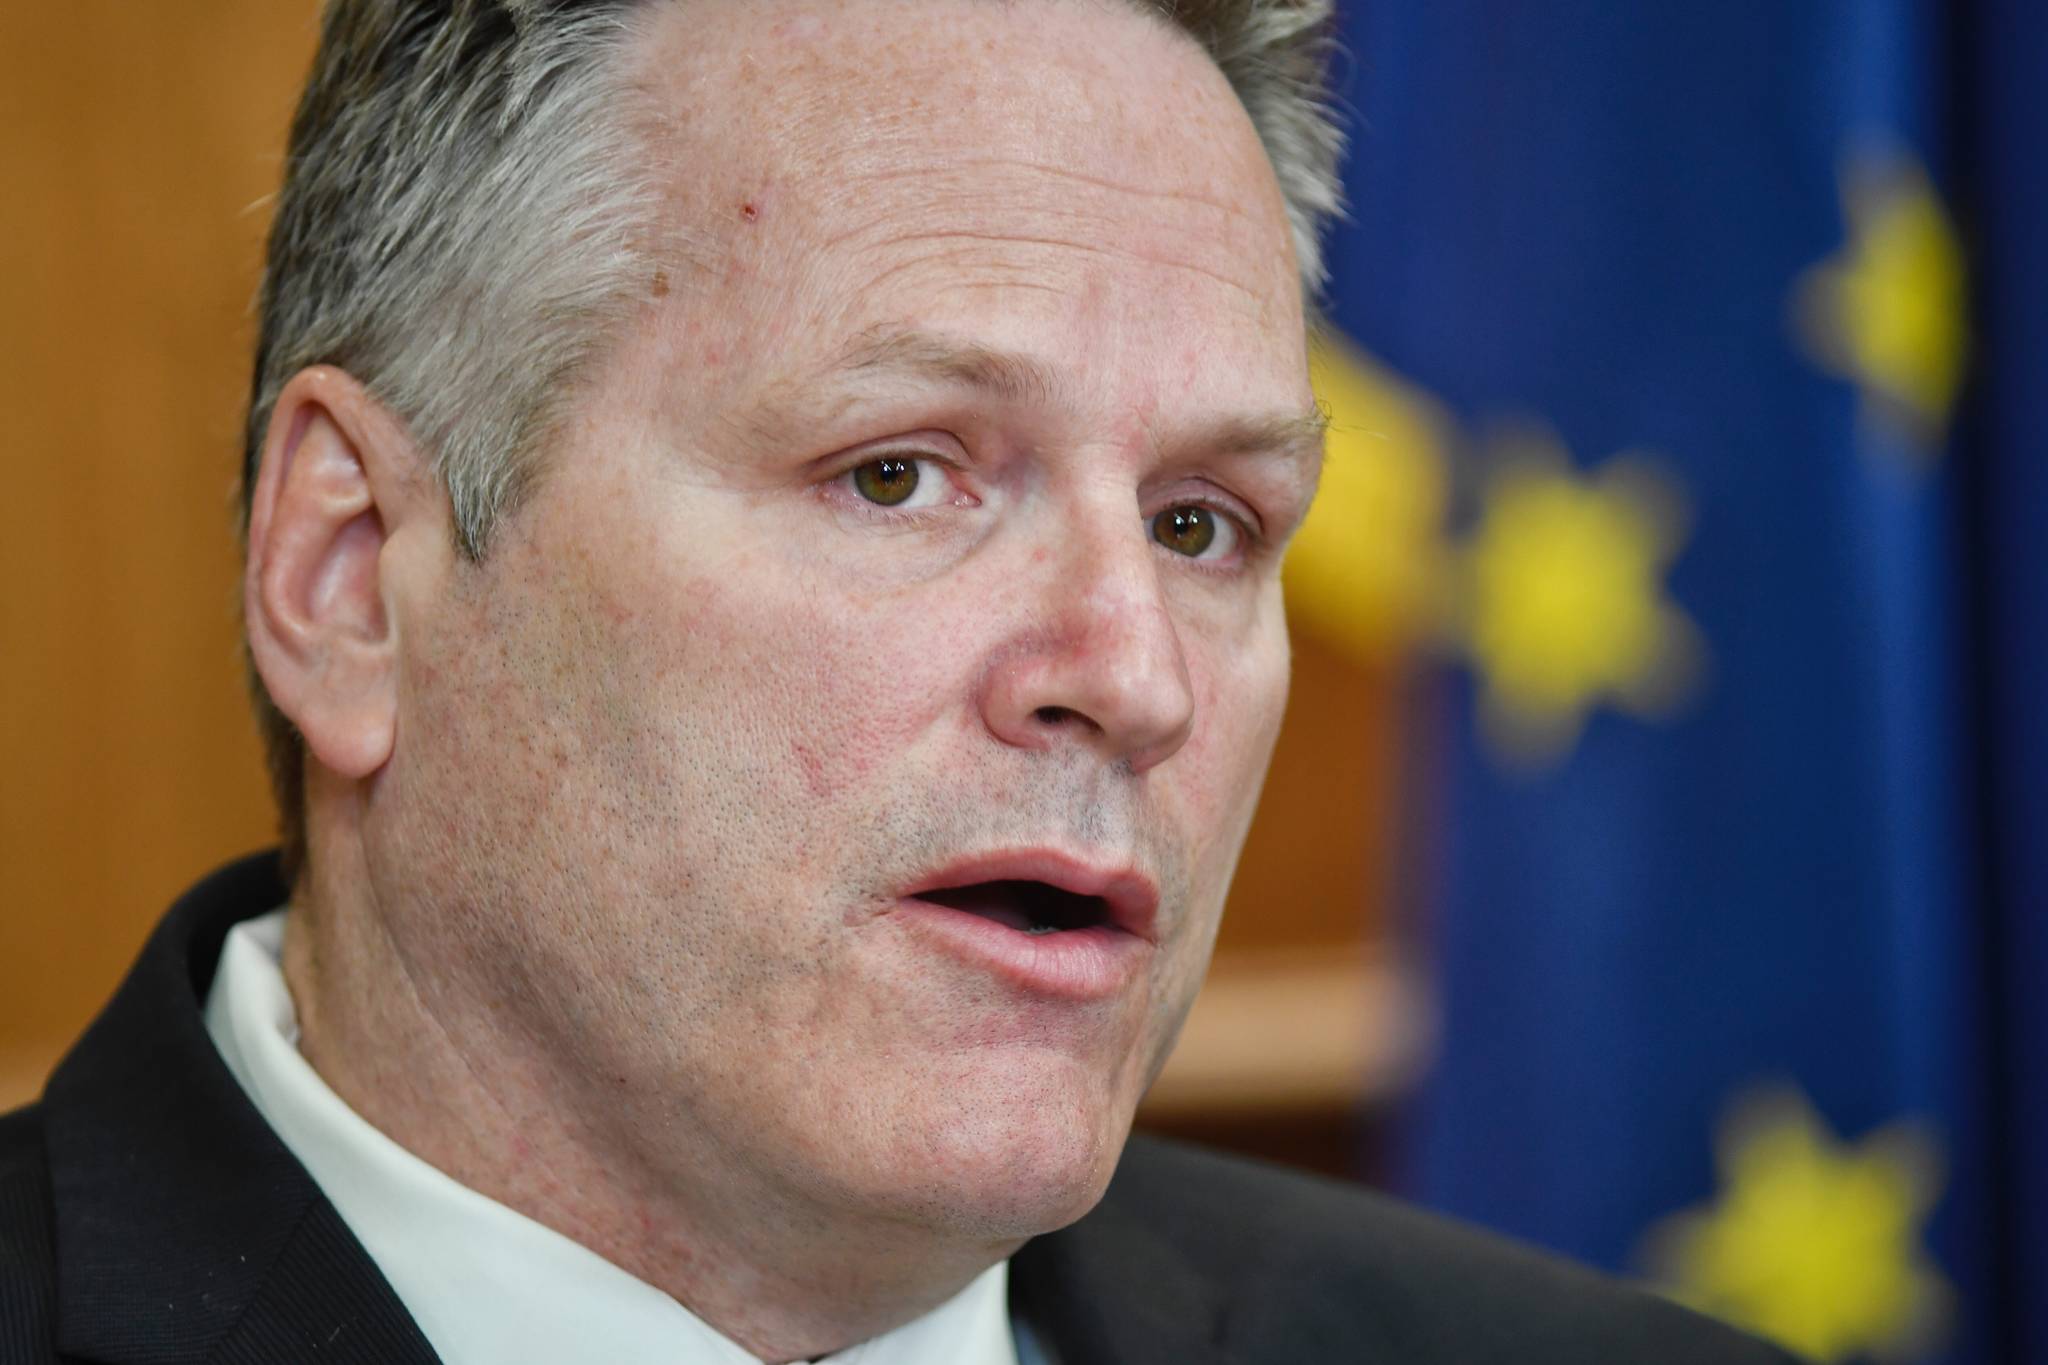 The Alaska Senate just passed a crime bill. Here’s what it means for Gov. Dunleavy’s ‘war on criminals.’